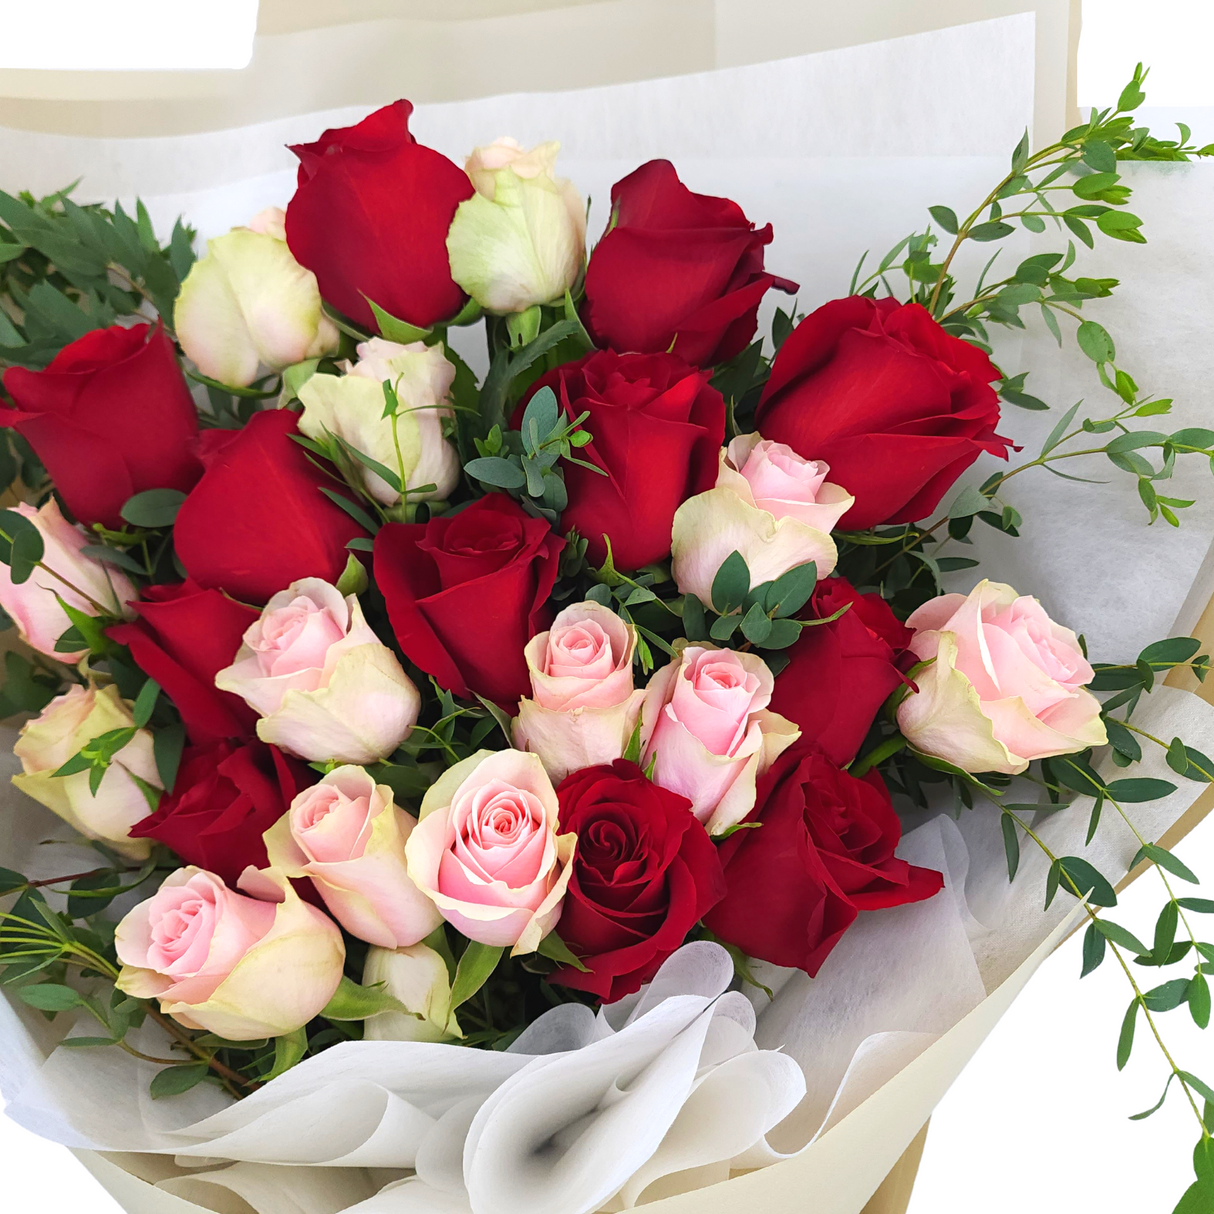 sangria Red & Pink Roses Giant Bouquet Birthday Flower Bouquet Singapore